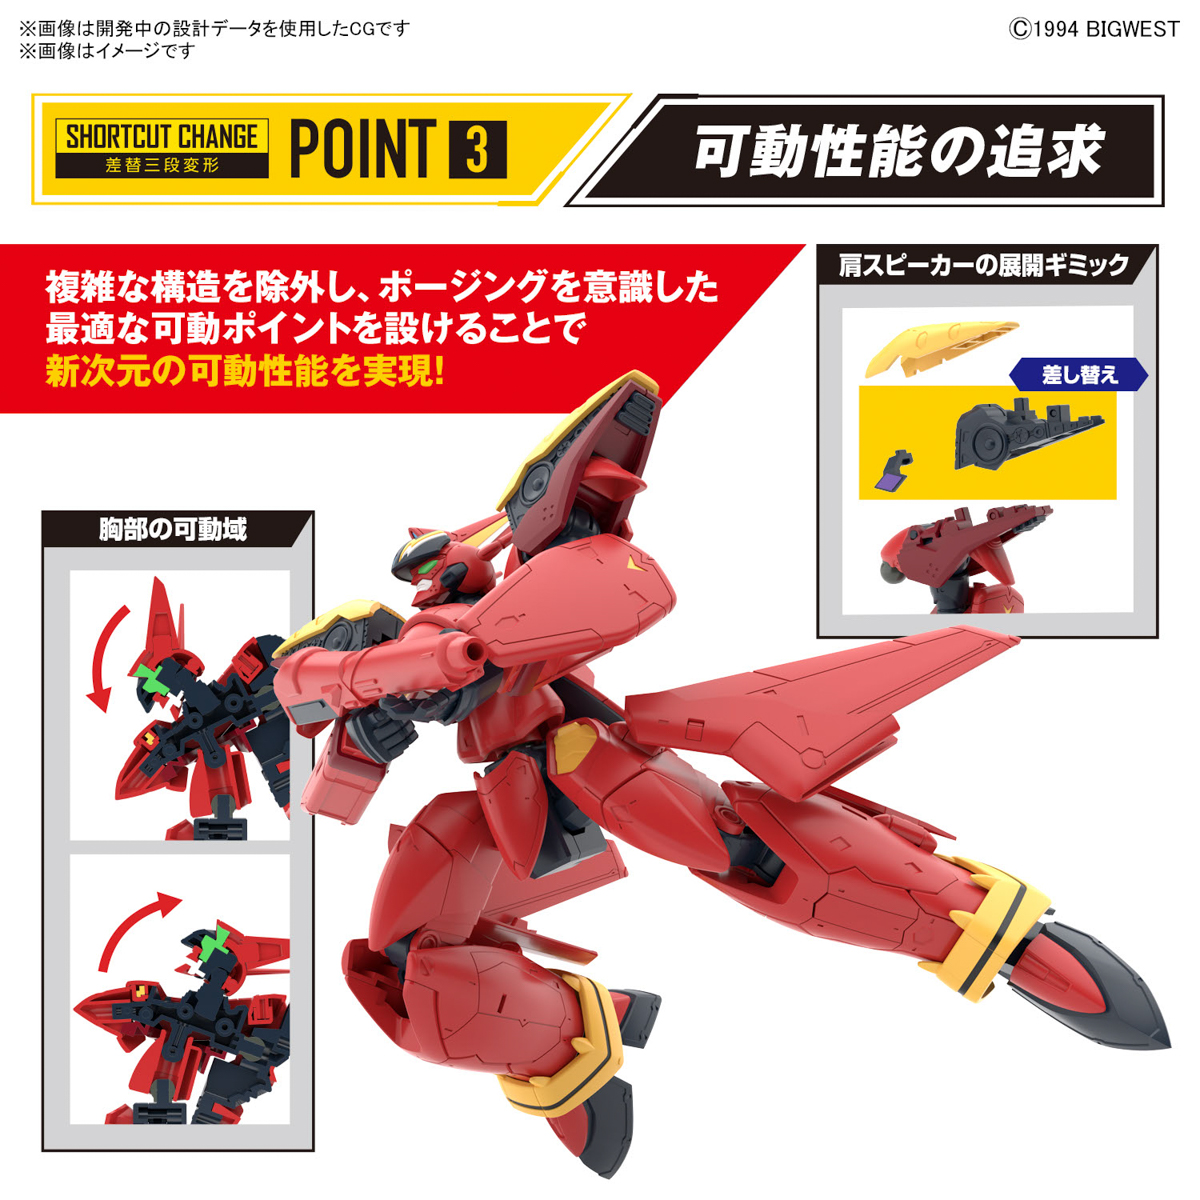 MACROSS 7:  HG 1/100 VF-19 EXCALIBUR CUSTOM (FIRE VALKYRIE) WITH SOUND BOOSTER - 08